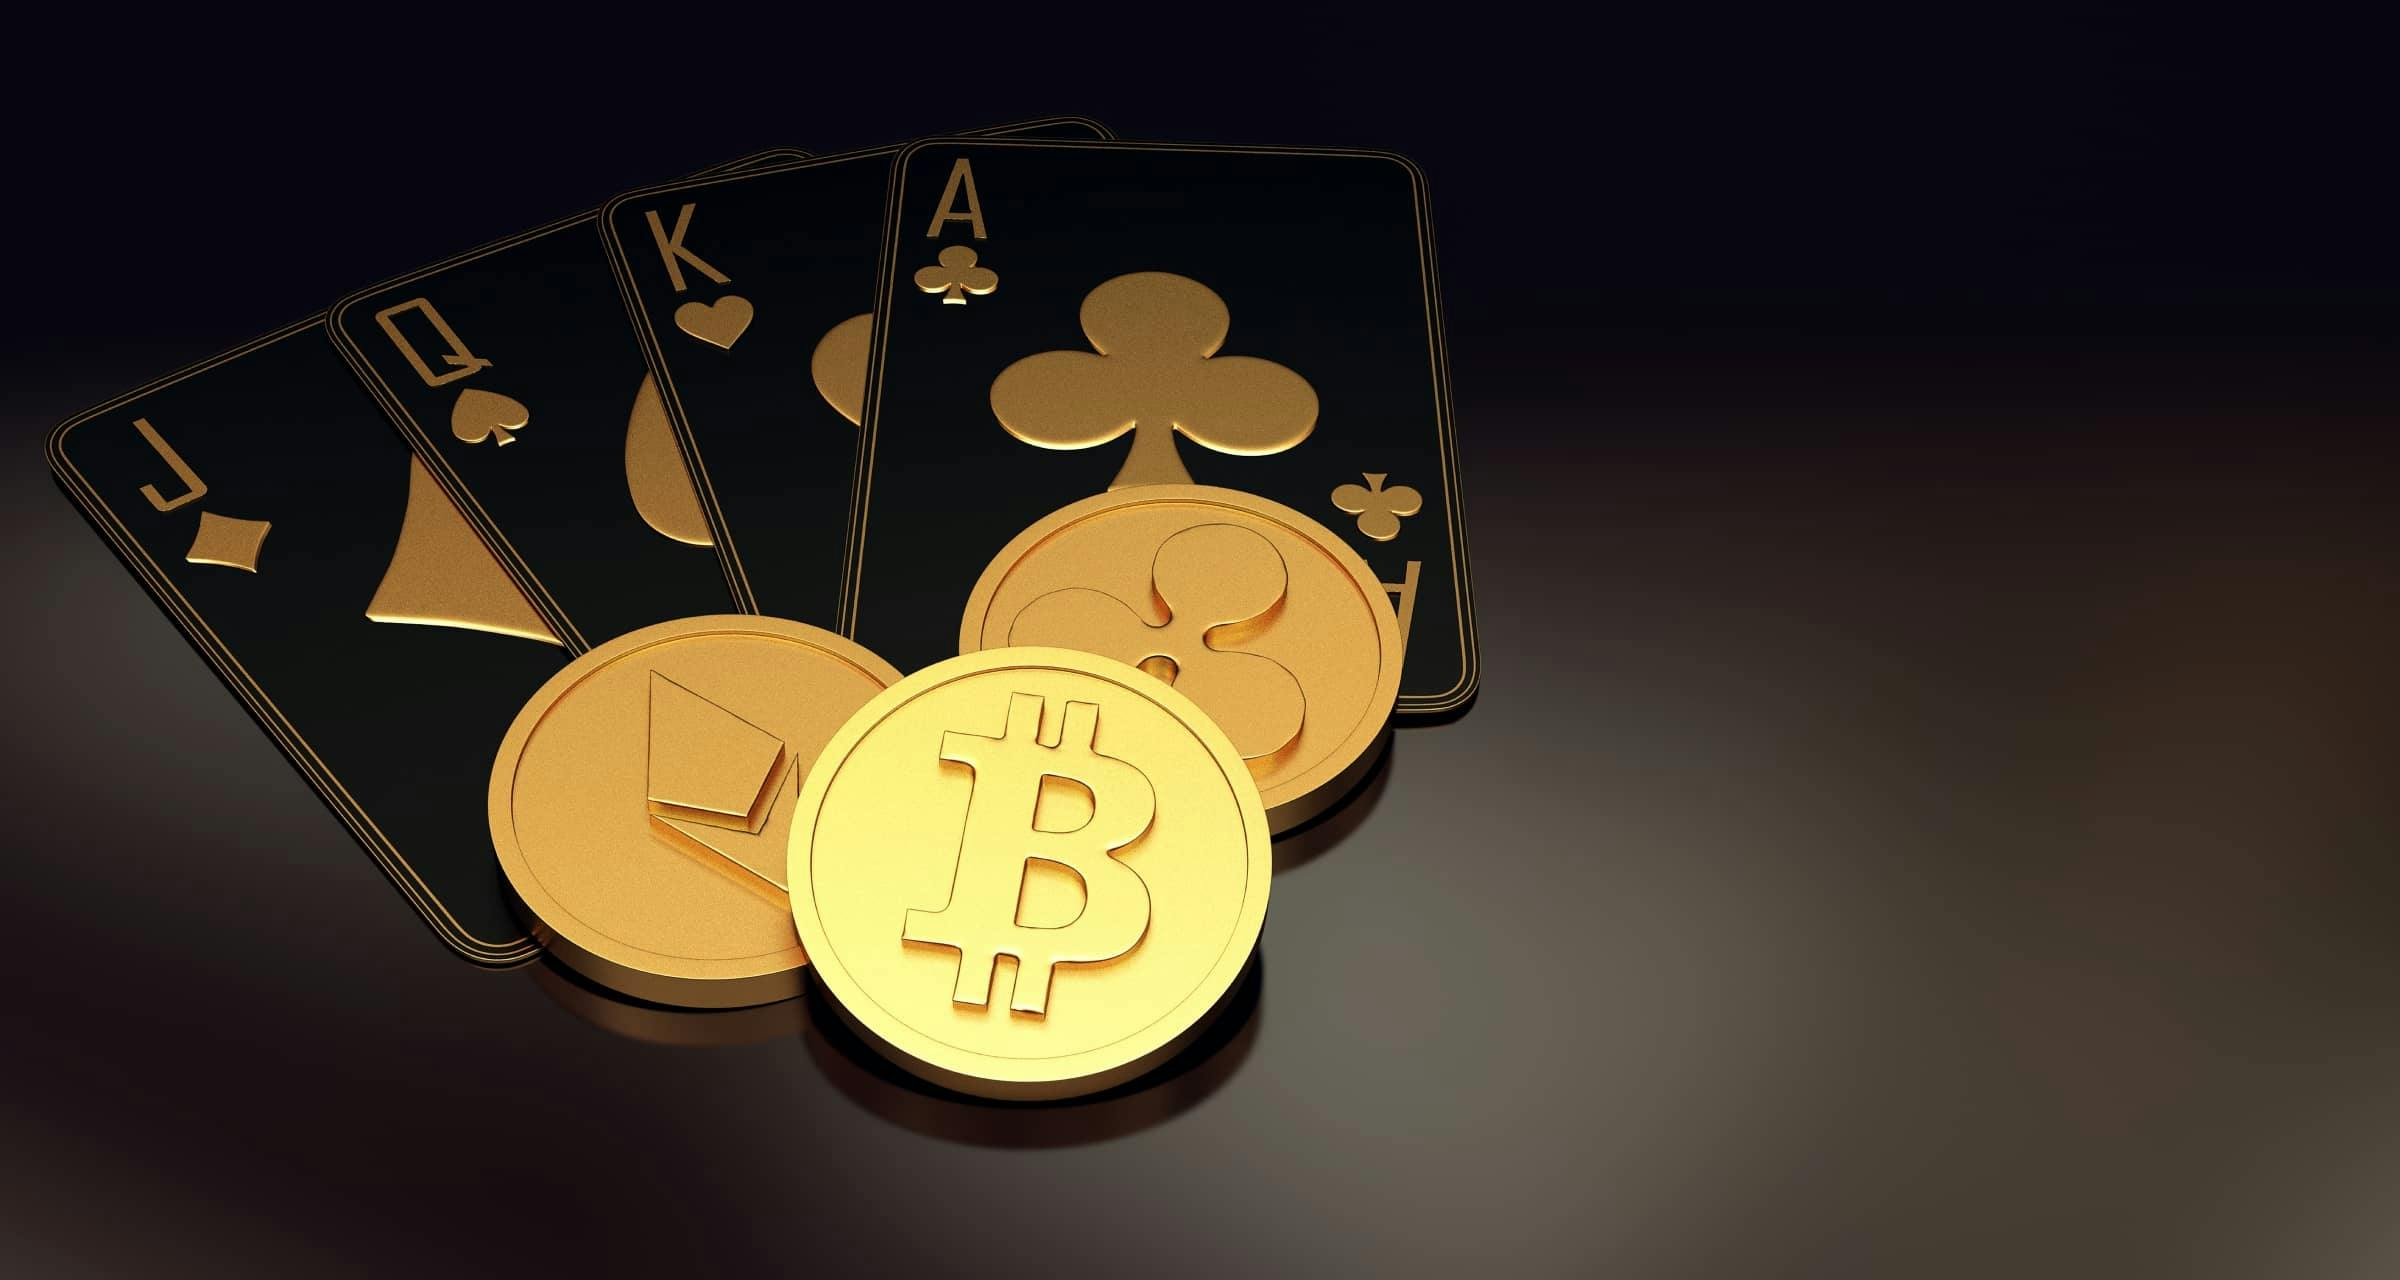 Double your winnings with Live Litecoin Baccarat